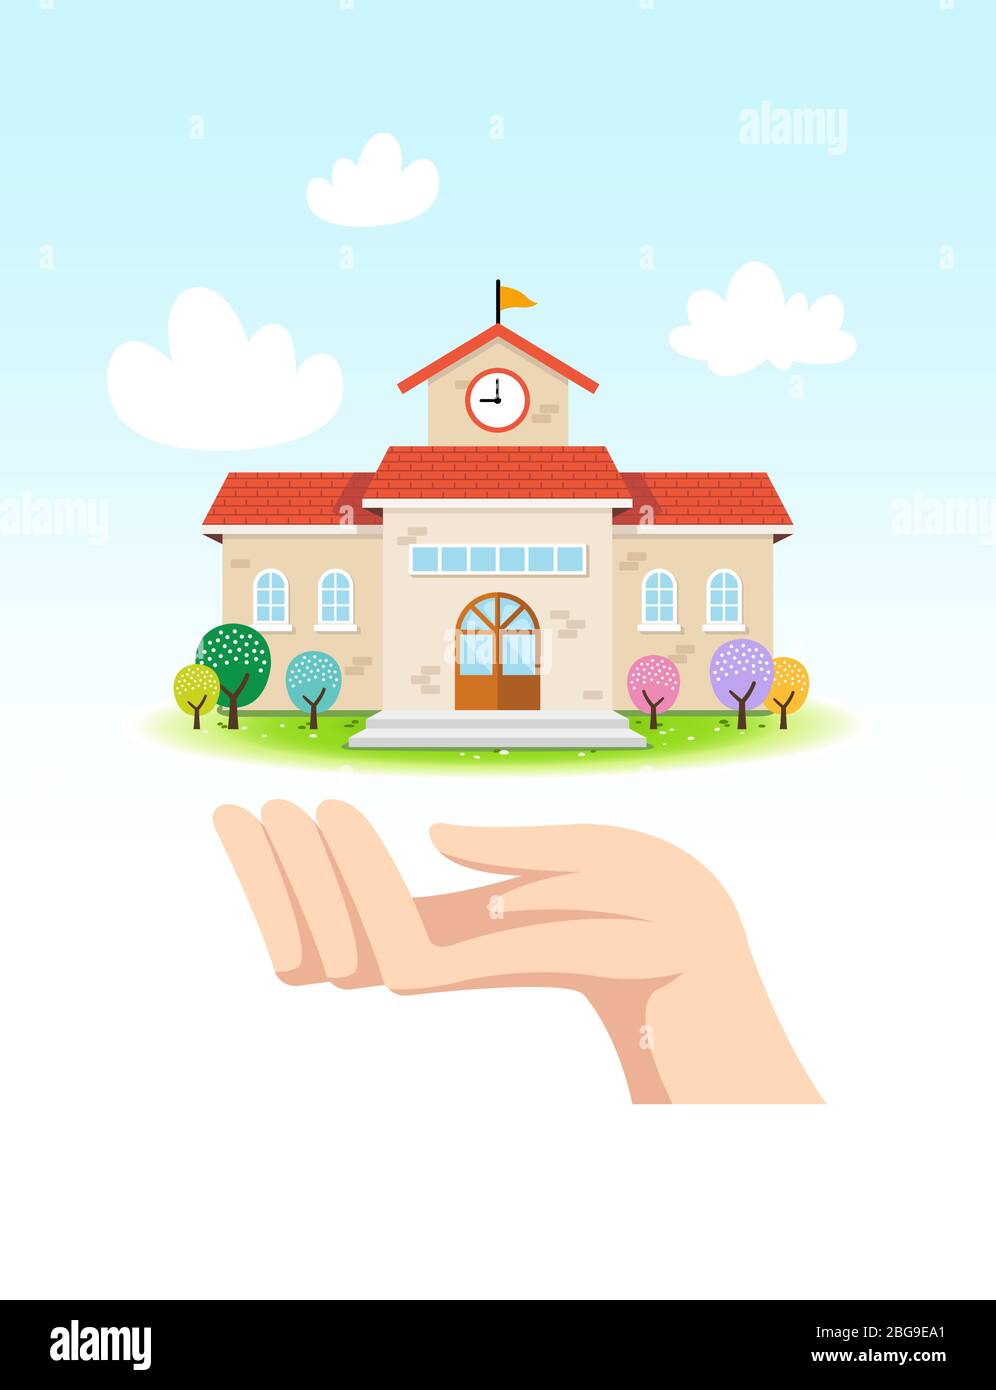 Sunny day, school building and support, hand cooperation, concept illustration design Stock Vector